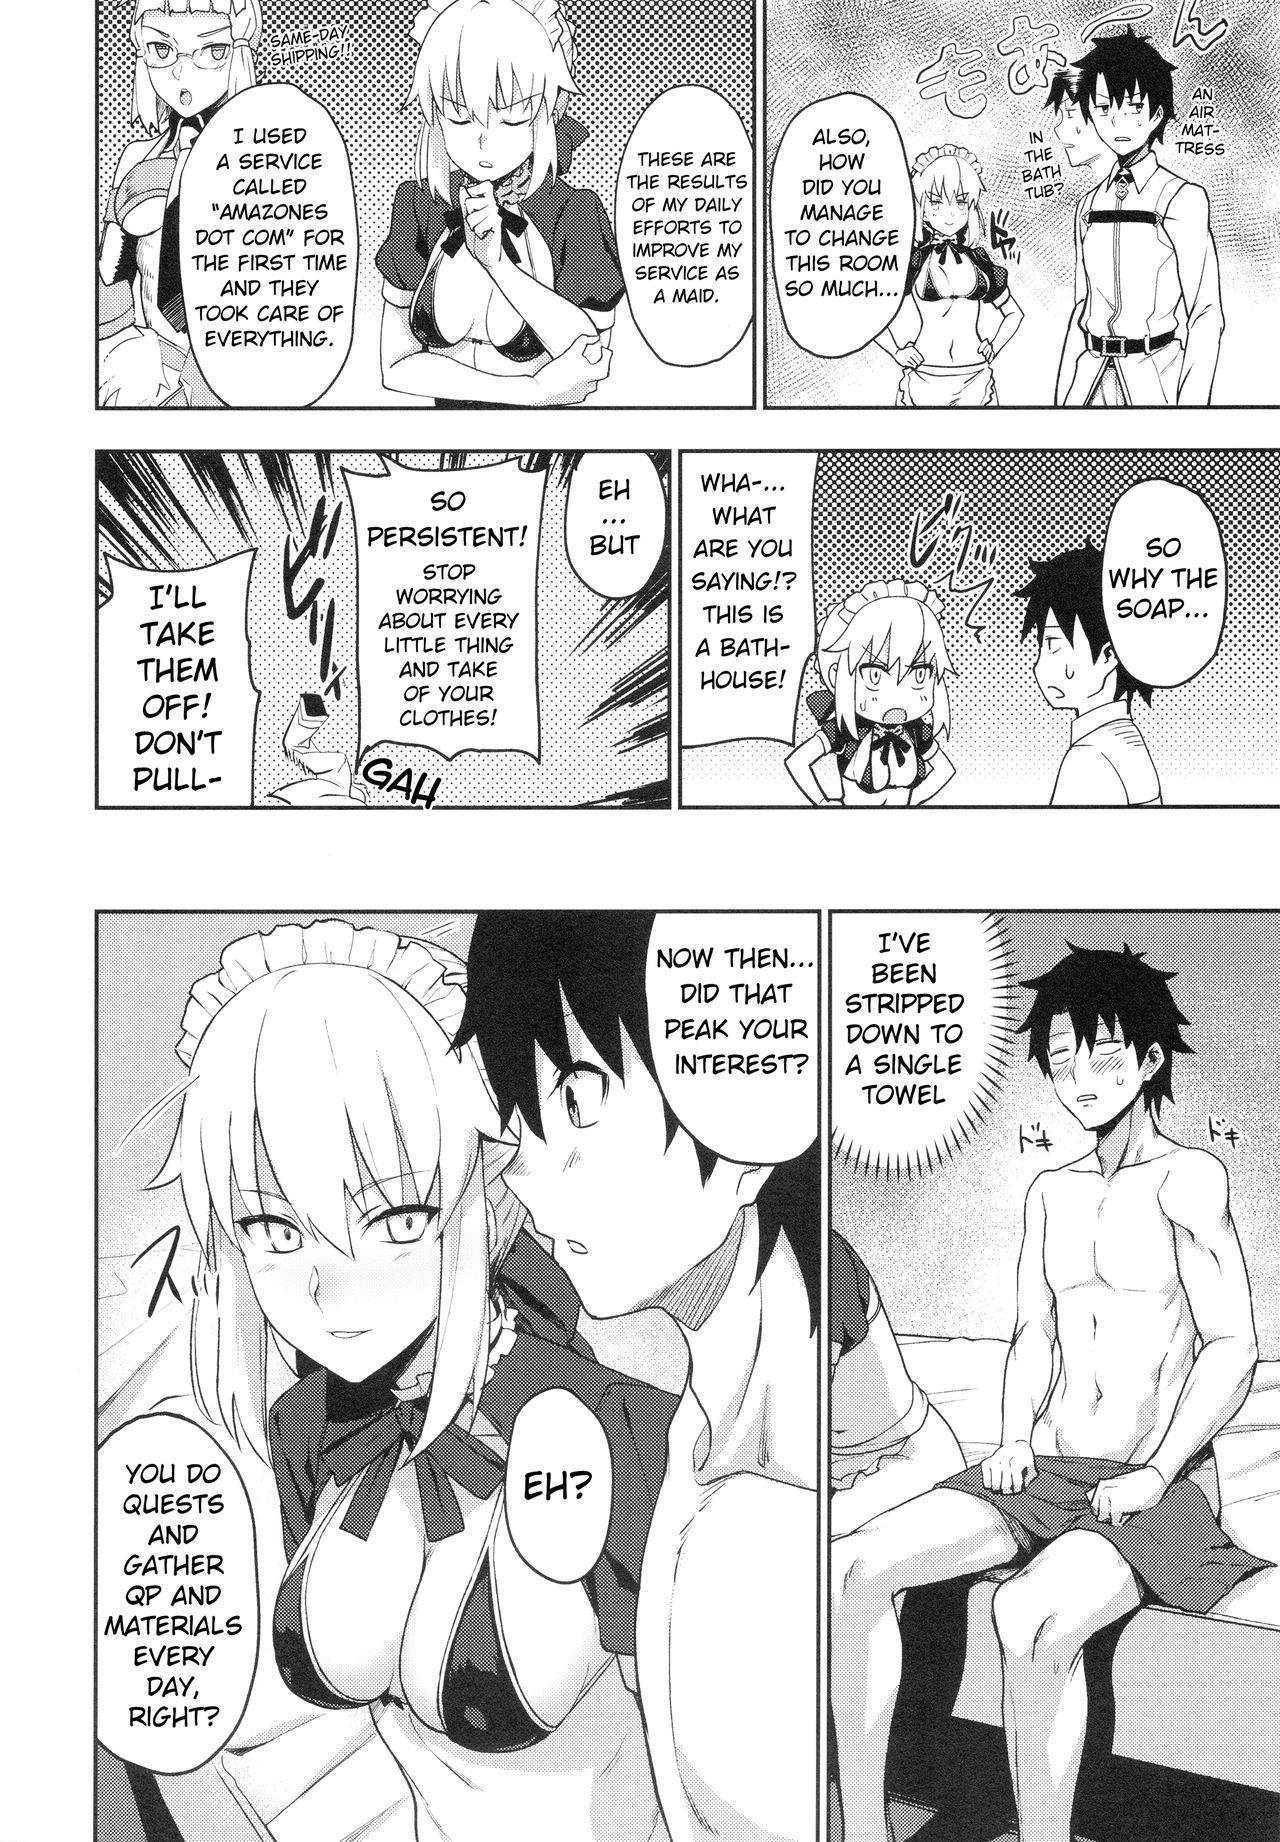 Whipping Chaldea Soap SSS-kyuu Gohoushi Maid - Fate grand order Foot Job - Page 4